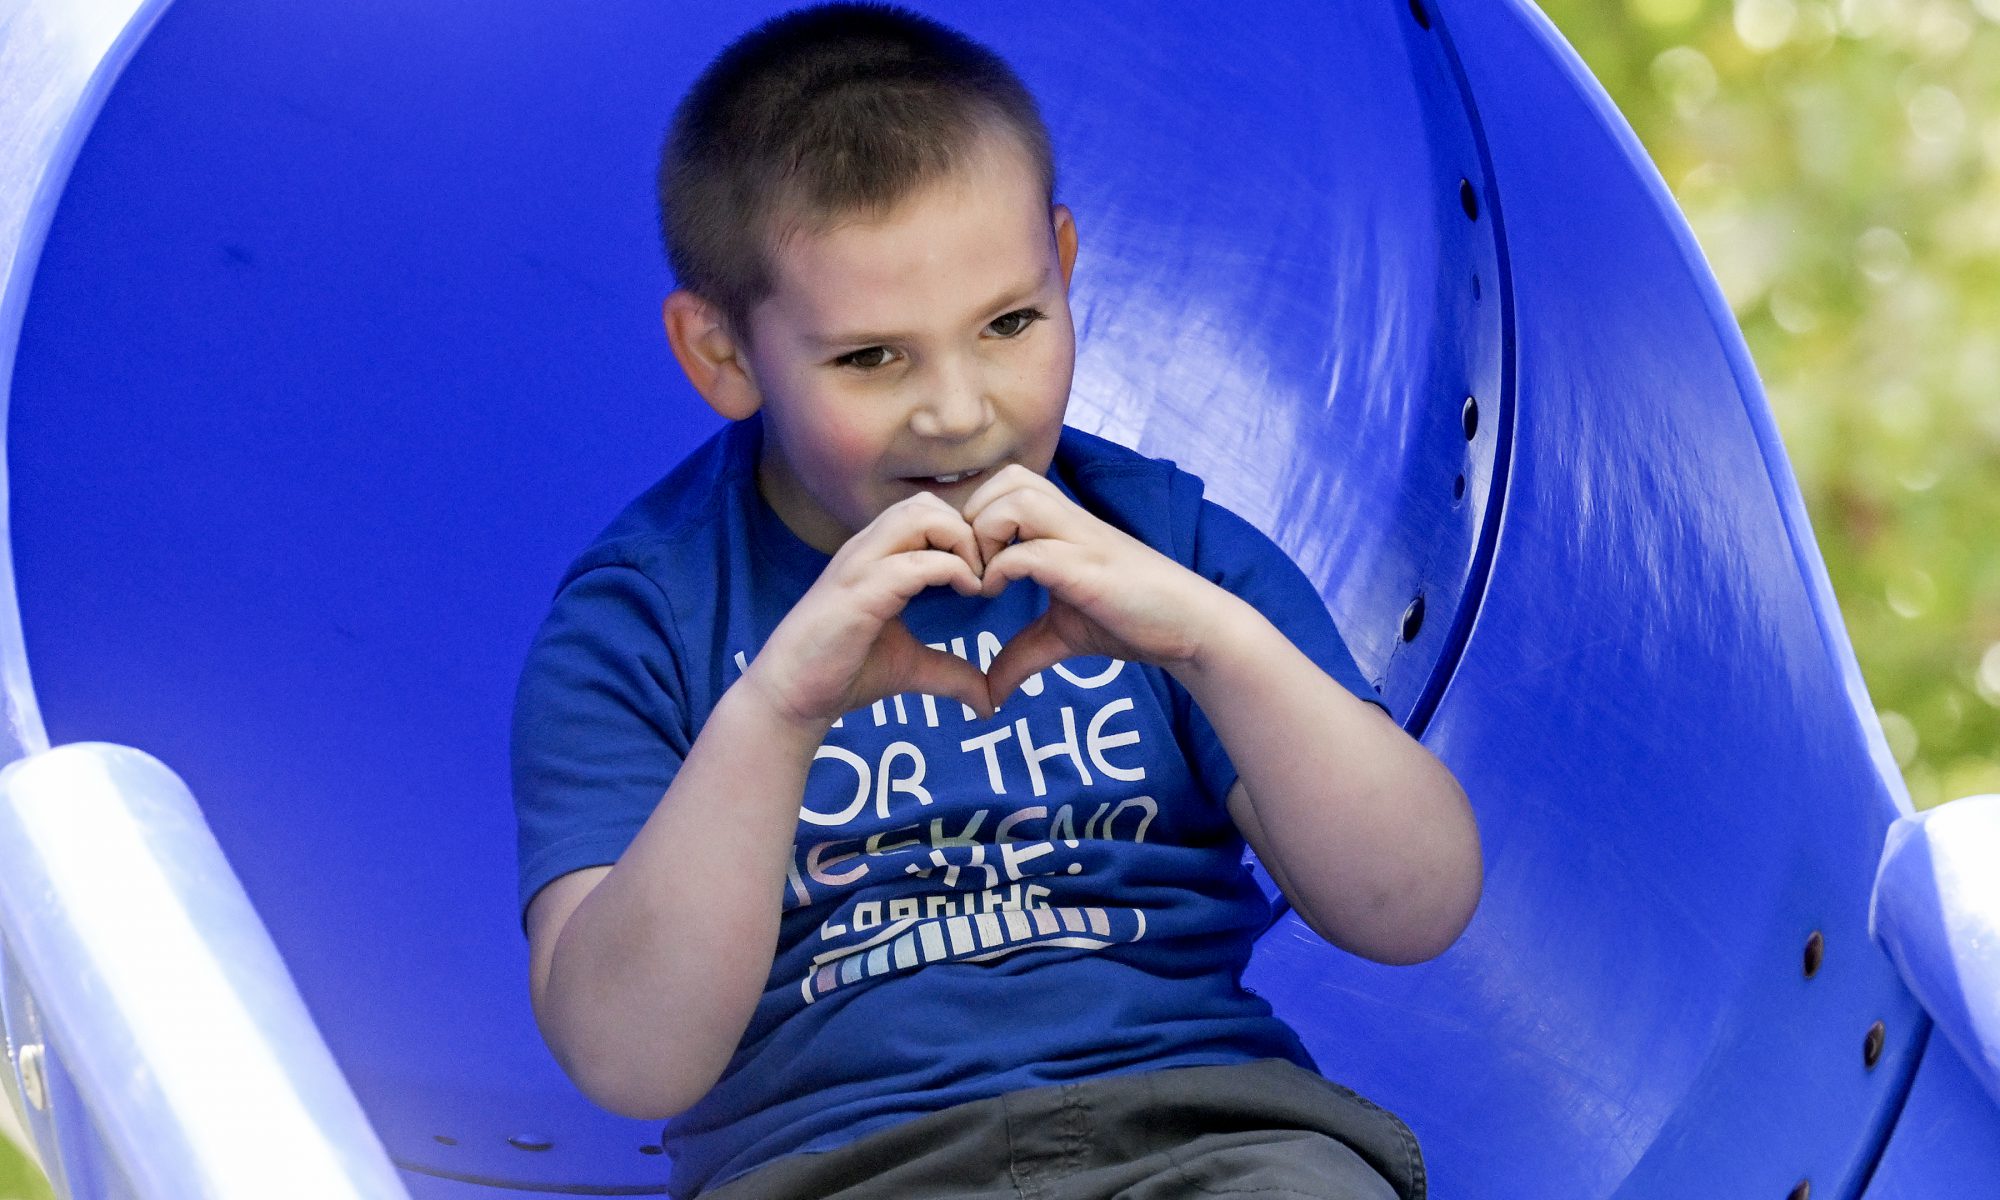 A young childe with close cut brown hair and wearing a bright blue t-shirt pauses at the bottom of a circular bright blue slide. They are smiling and holding their hands together to make the shape of a heart.